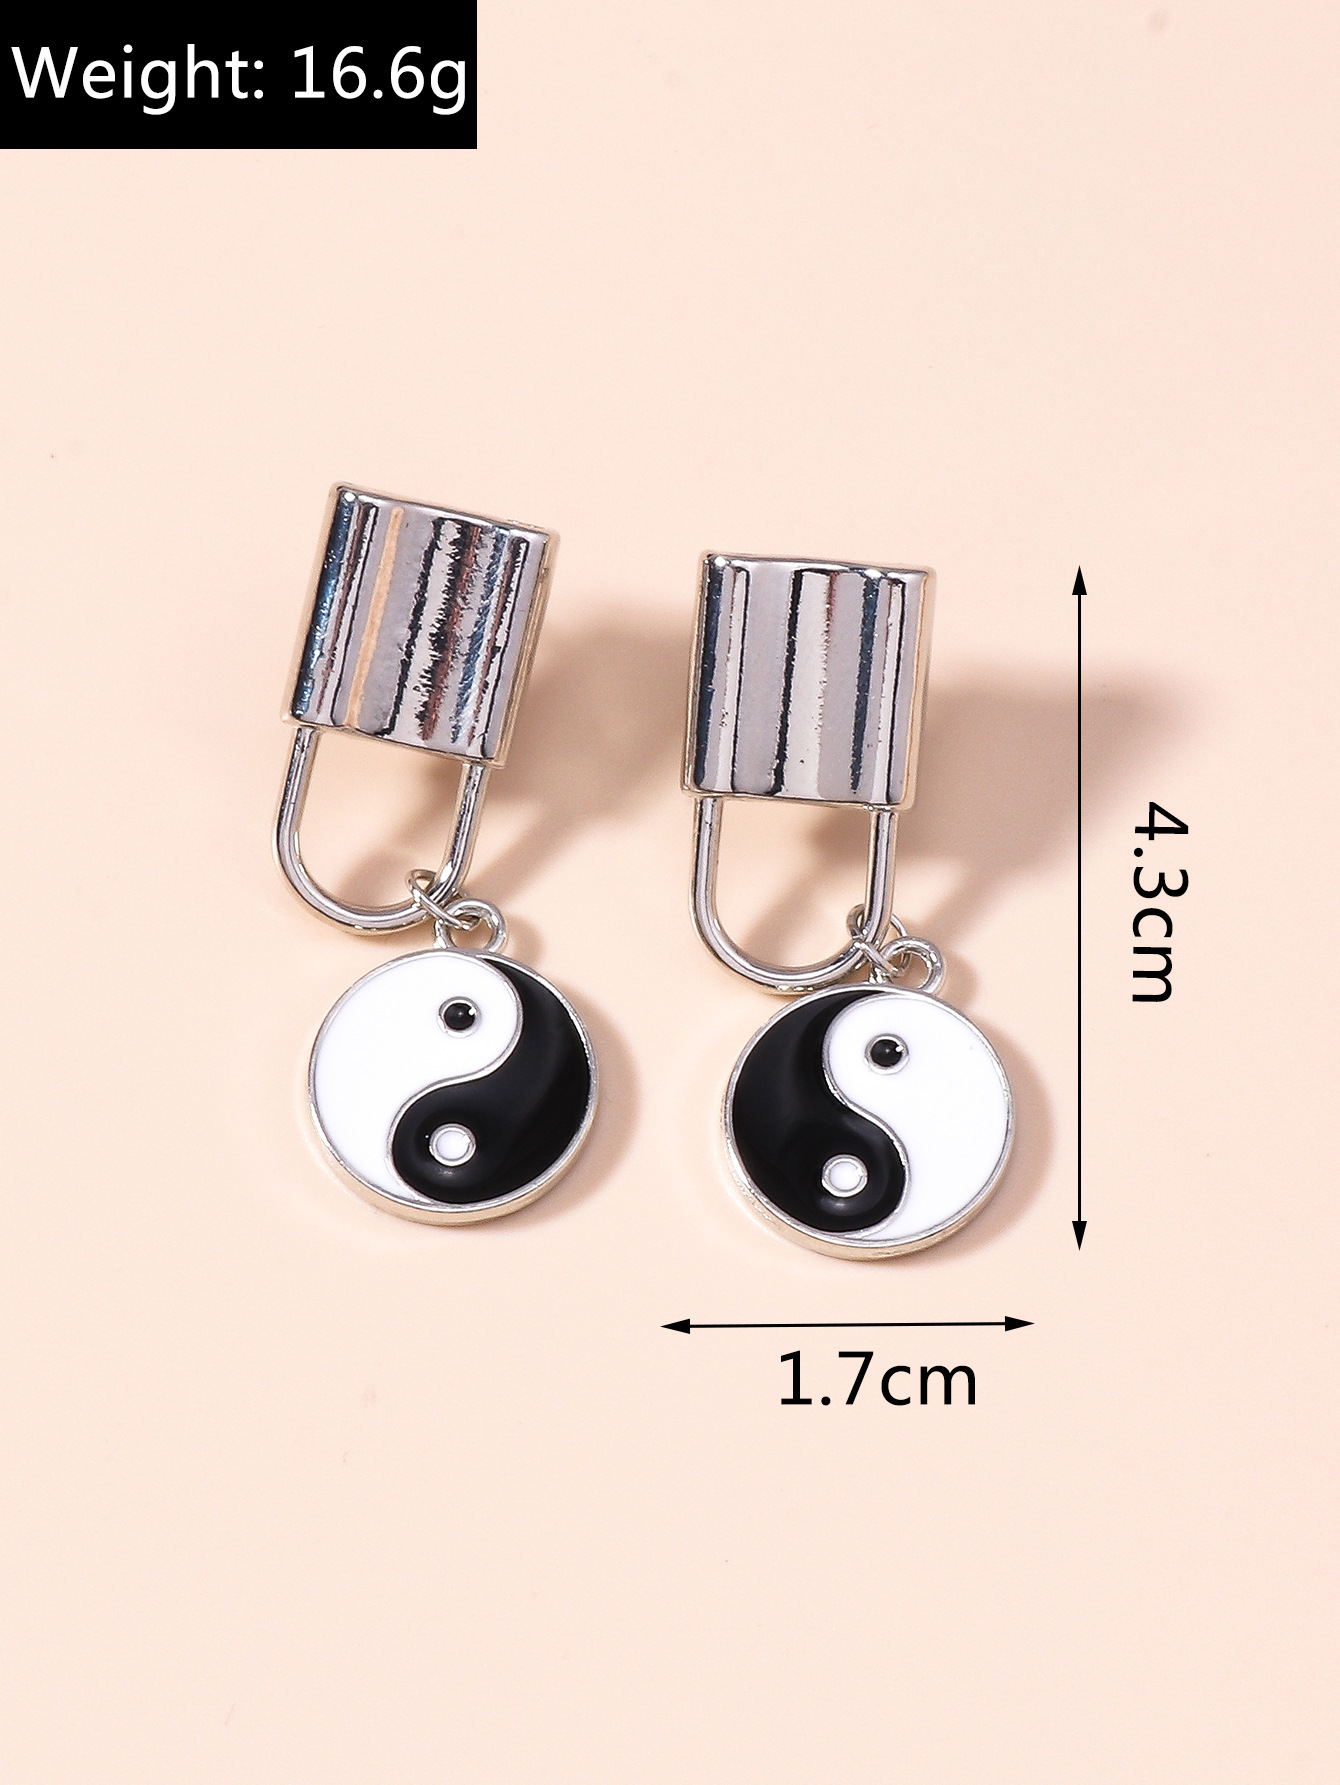 Ornament National Fashion Chinese Style Europe and America Cross Border EightDiagramShaped Appetizer HeartShape Lock Earrings Earringspicture1